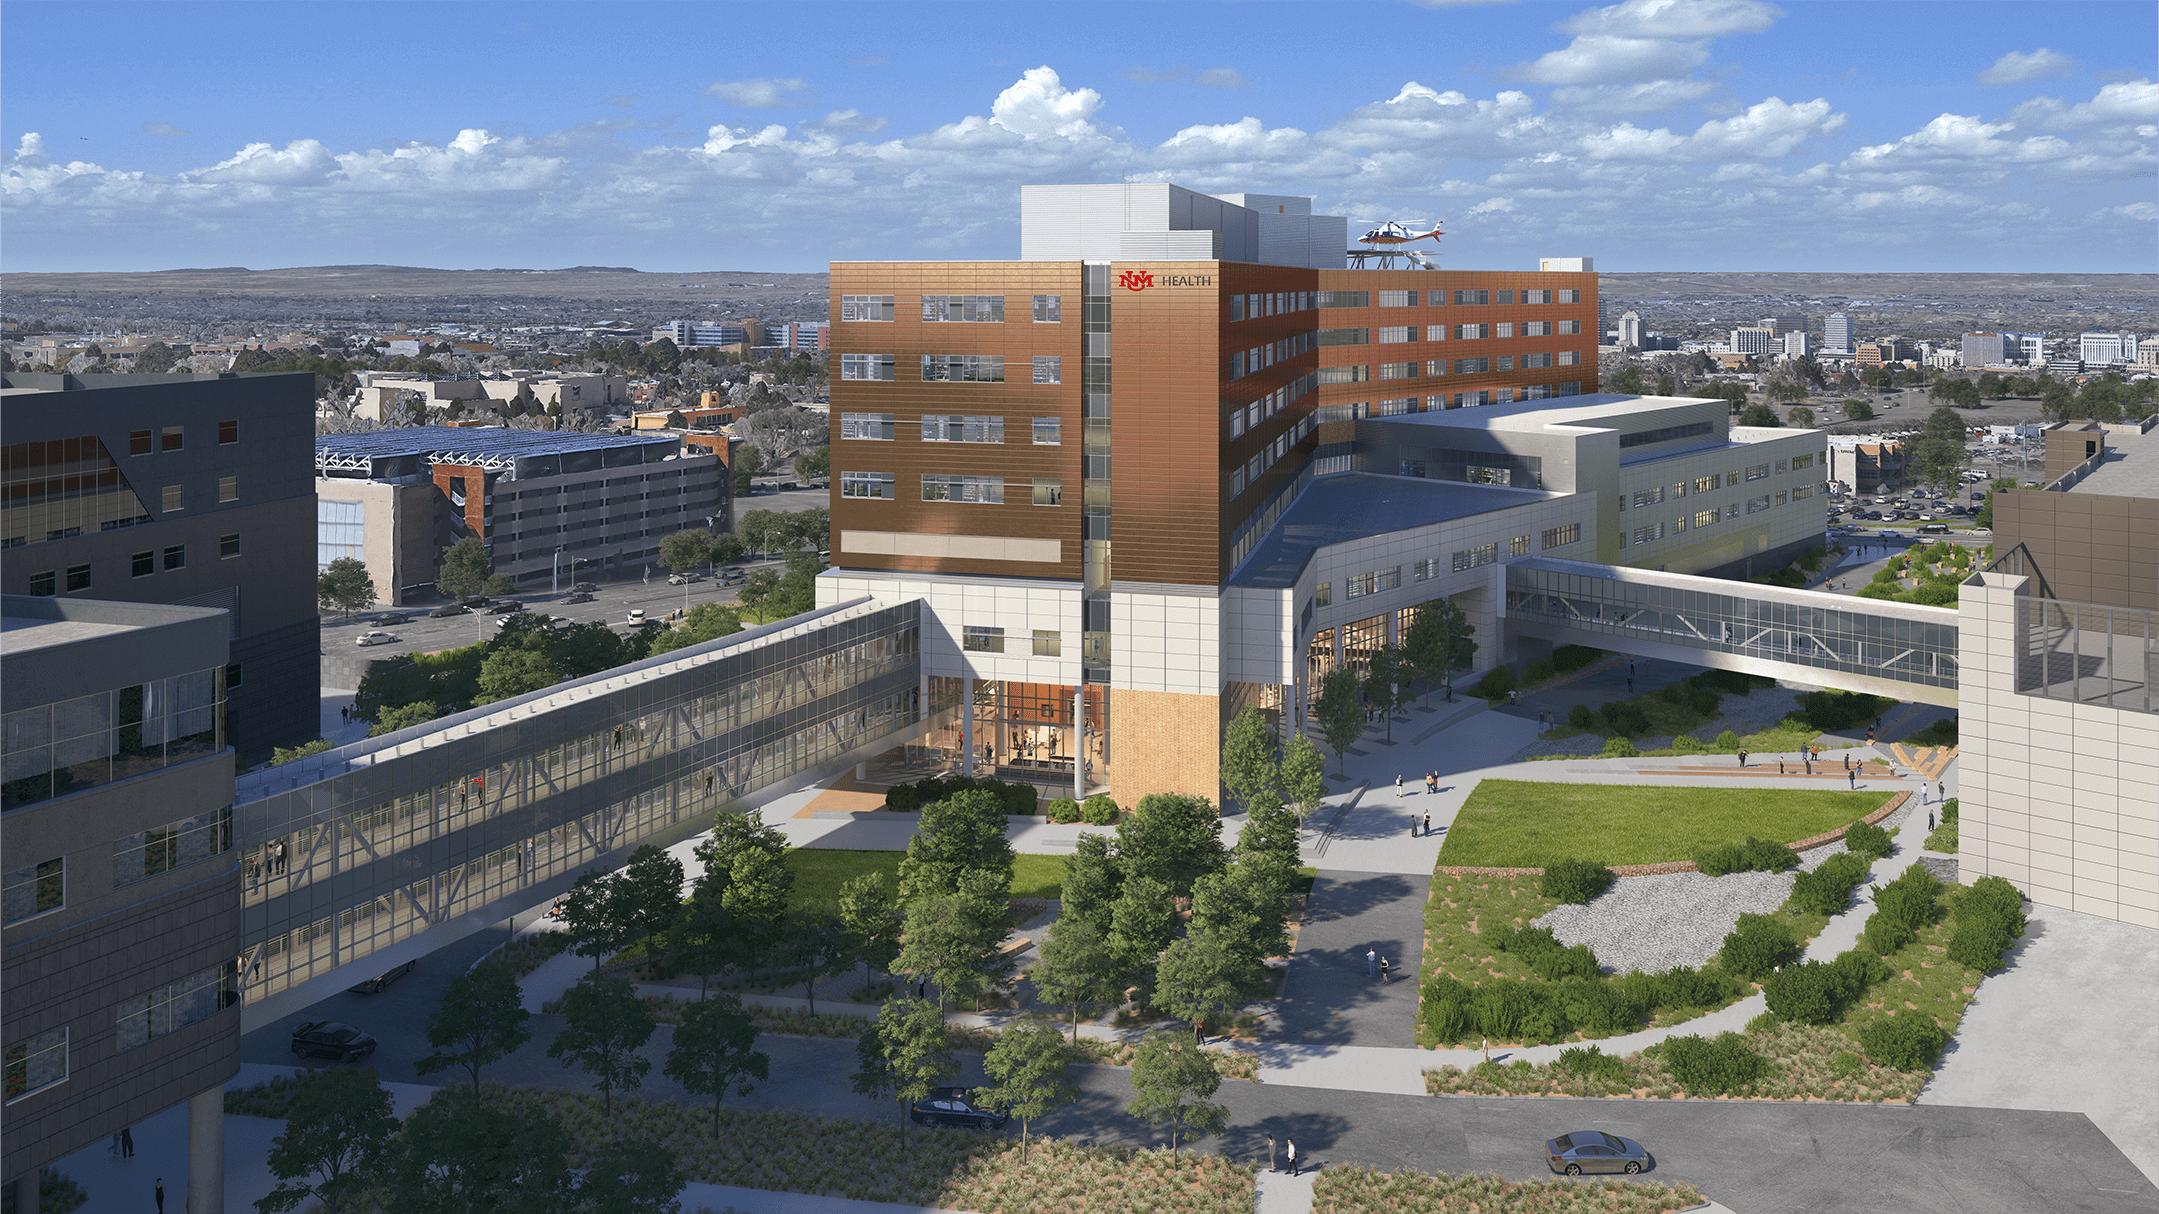 Photo of the New Hospital Tower Campus